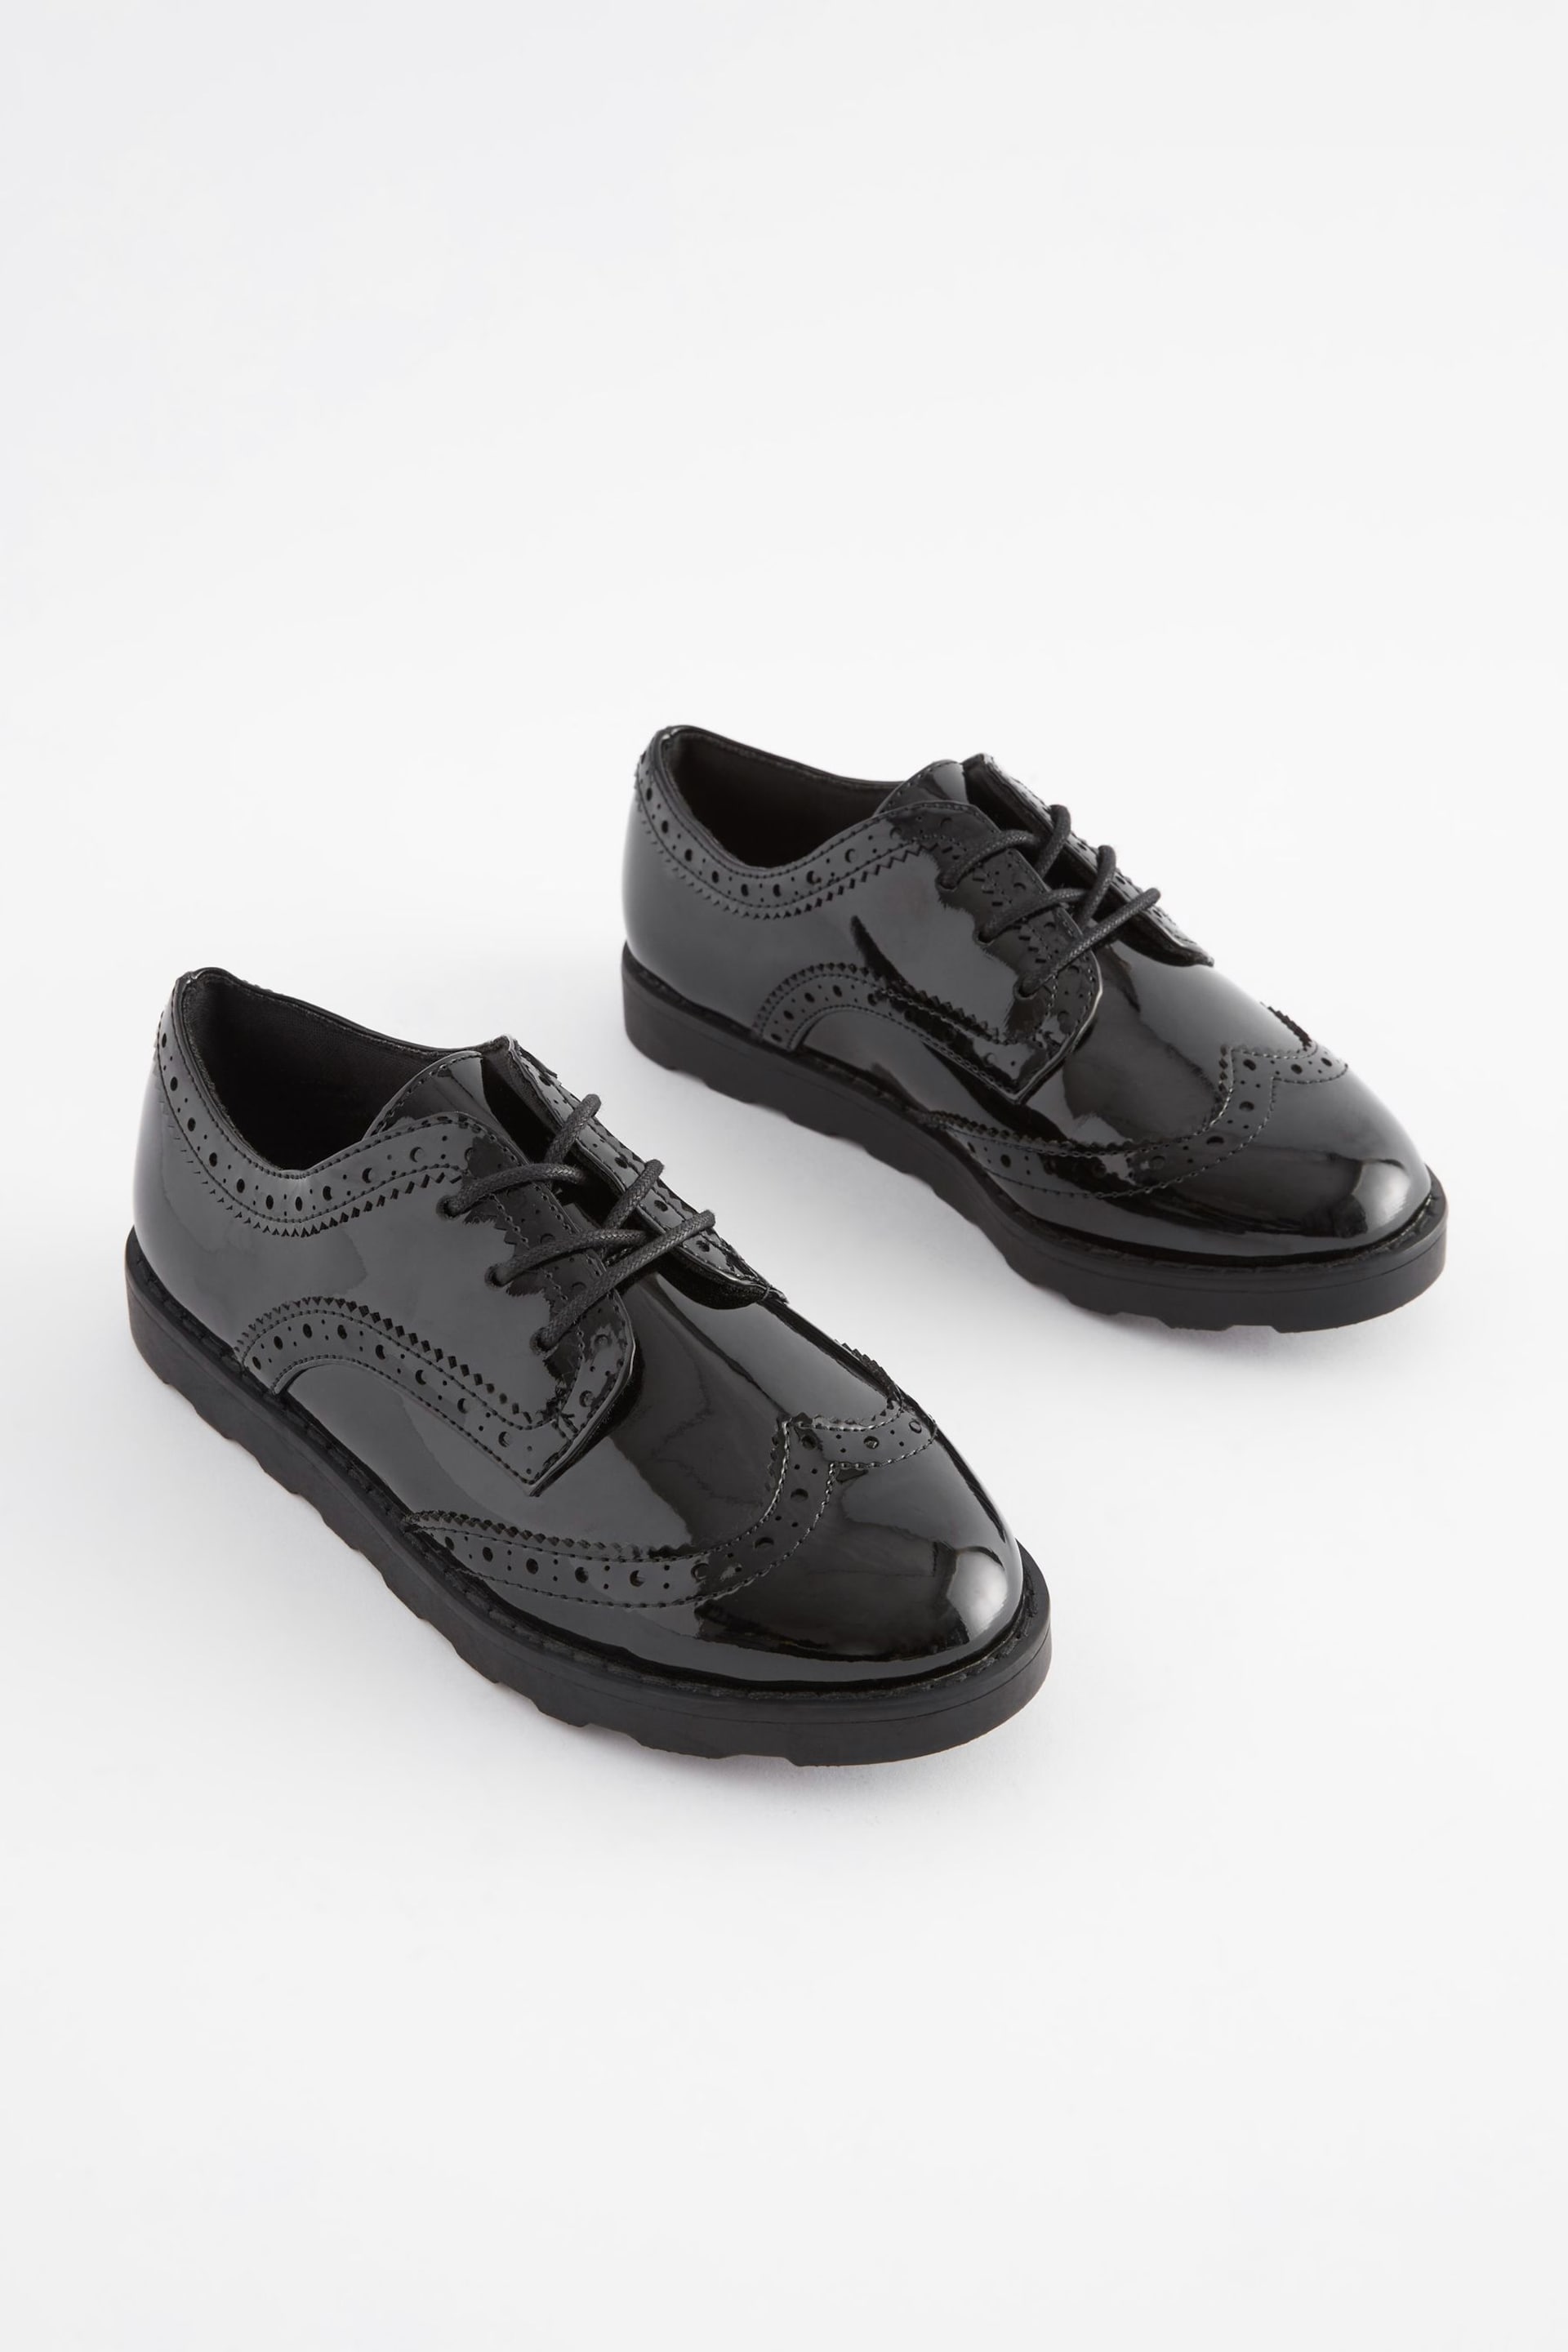 Black Patent Standard Fit (F) School Lace Brogues - Image 1 of 5